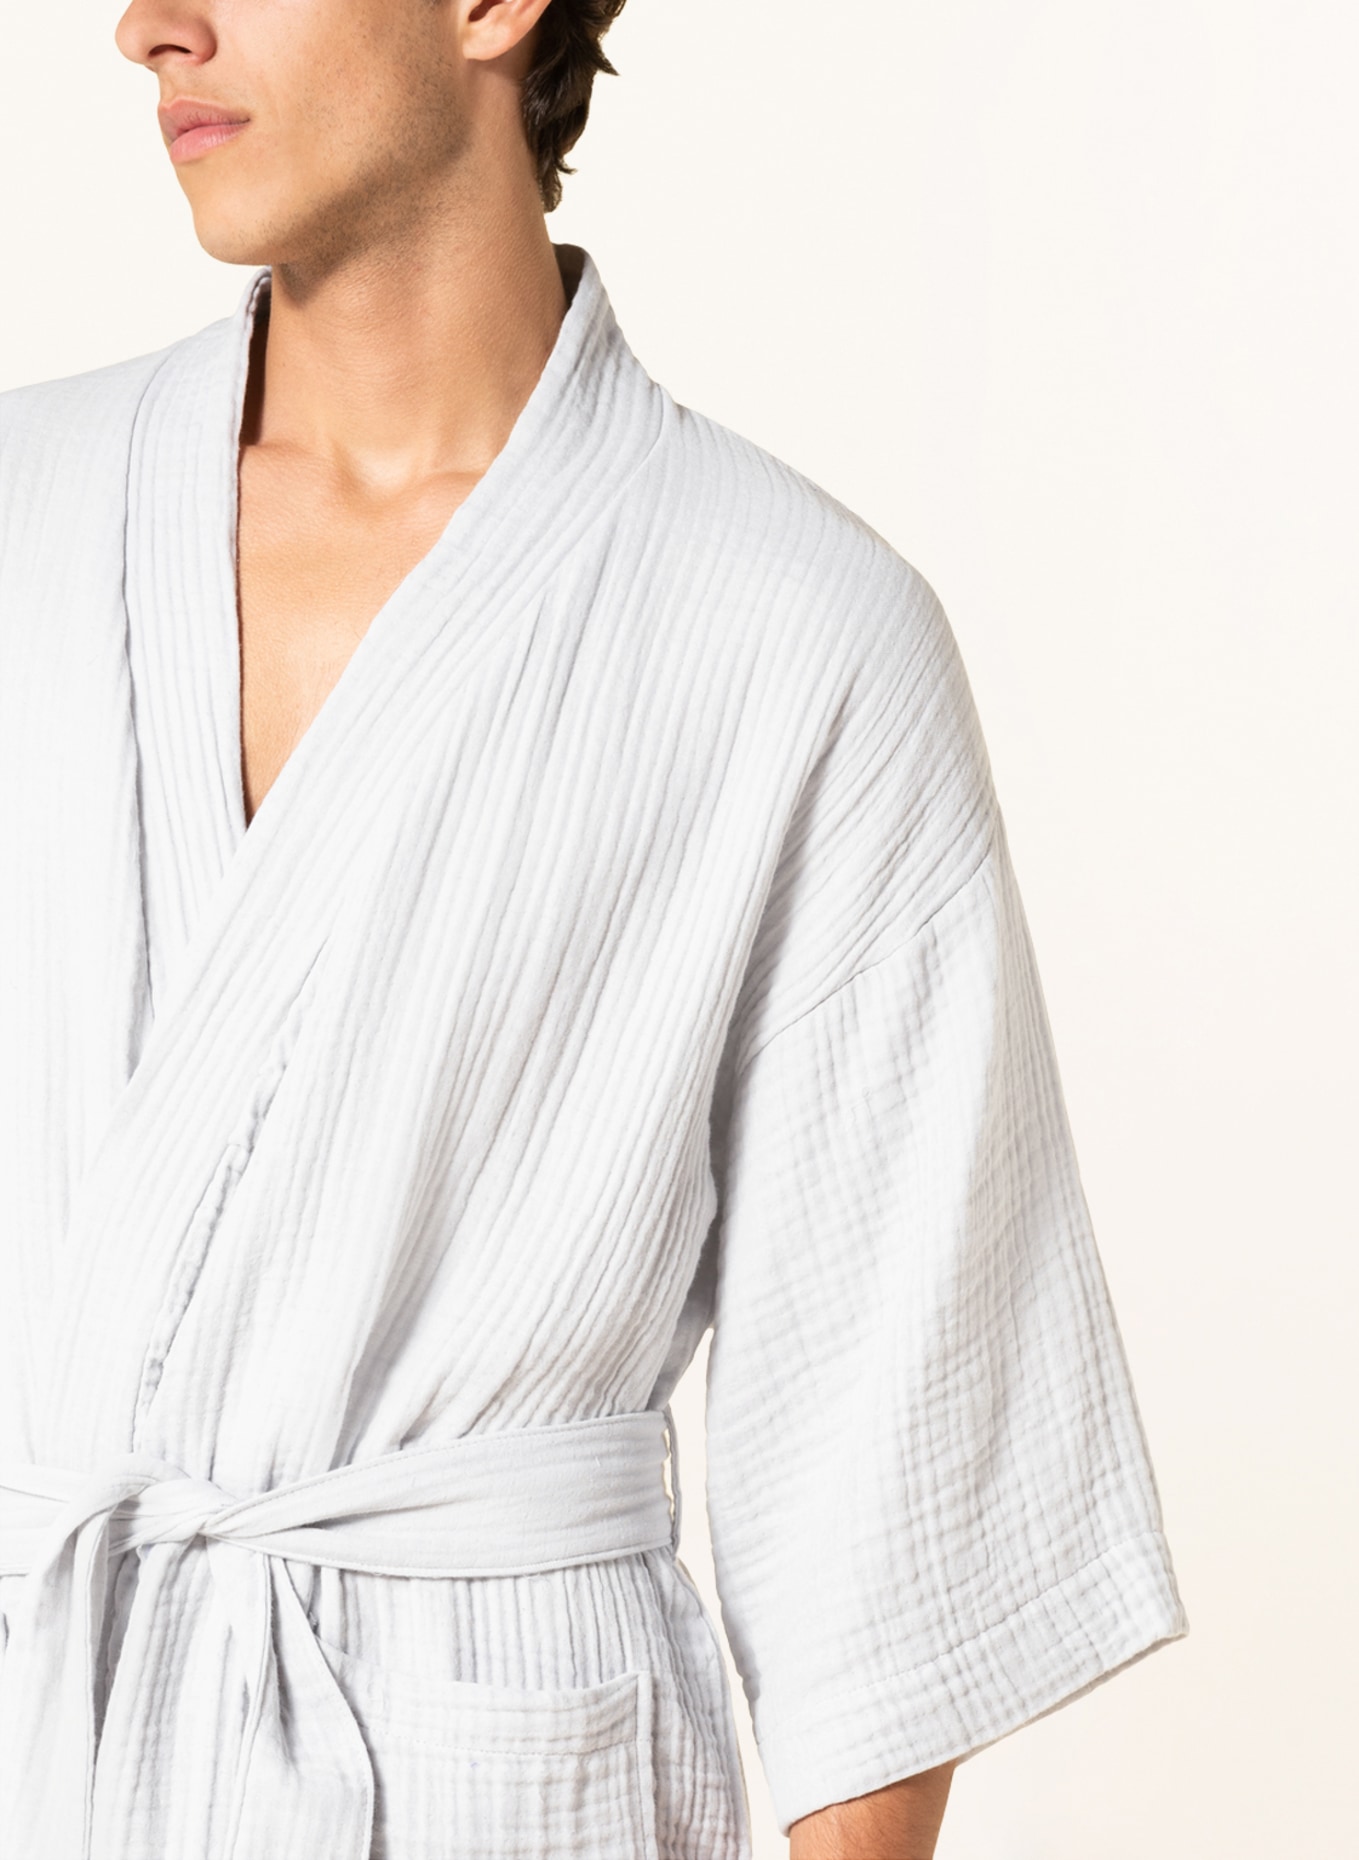 HAY Unisex bathrobe with 3/4 sleeves, Color: LIGHT GRAY (Image 4)